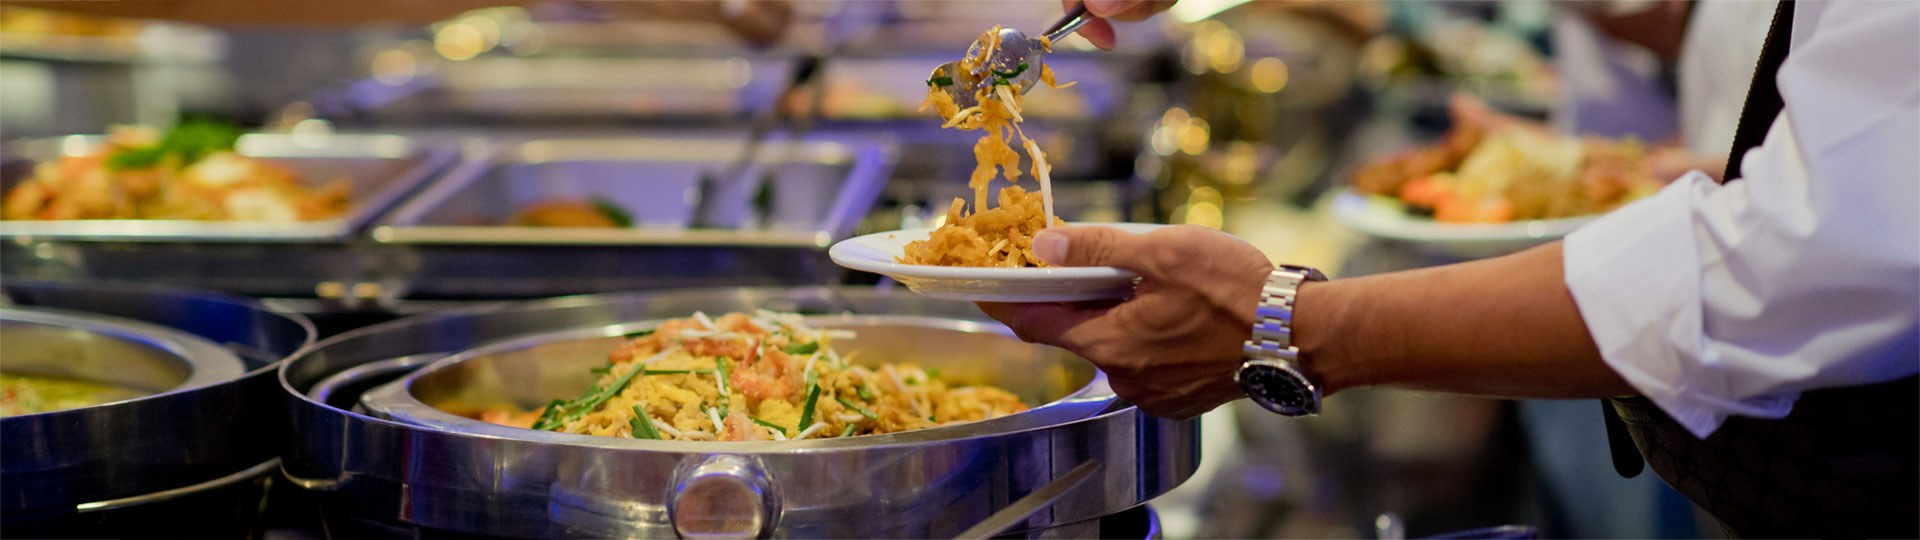 person serving pasta at a buffet